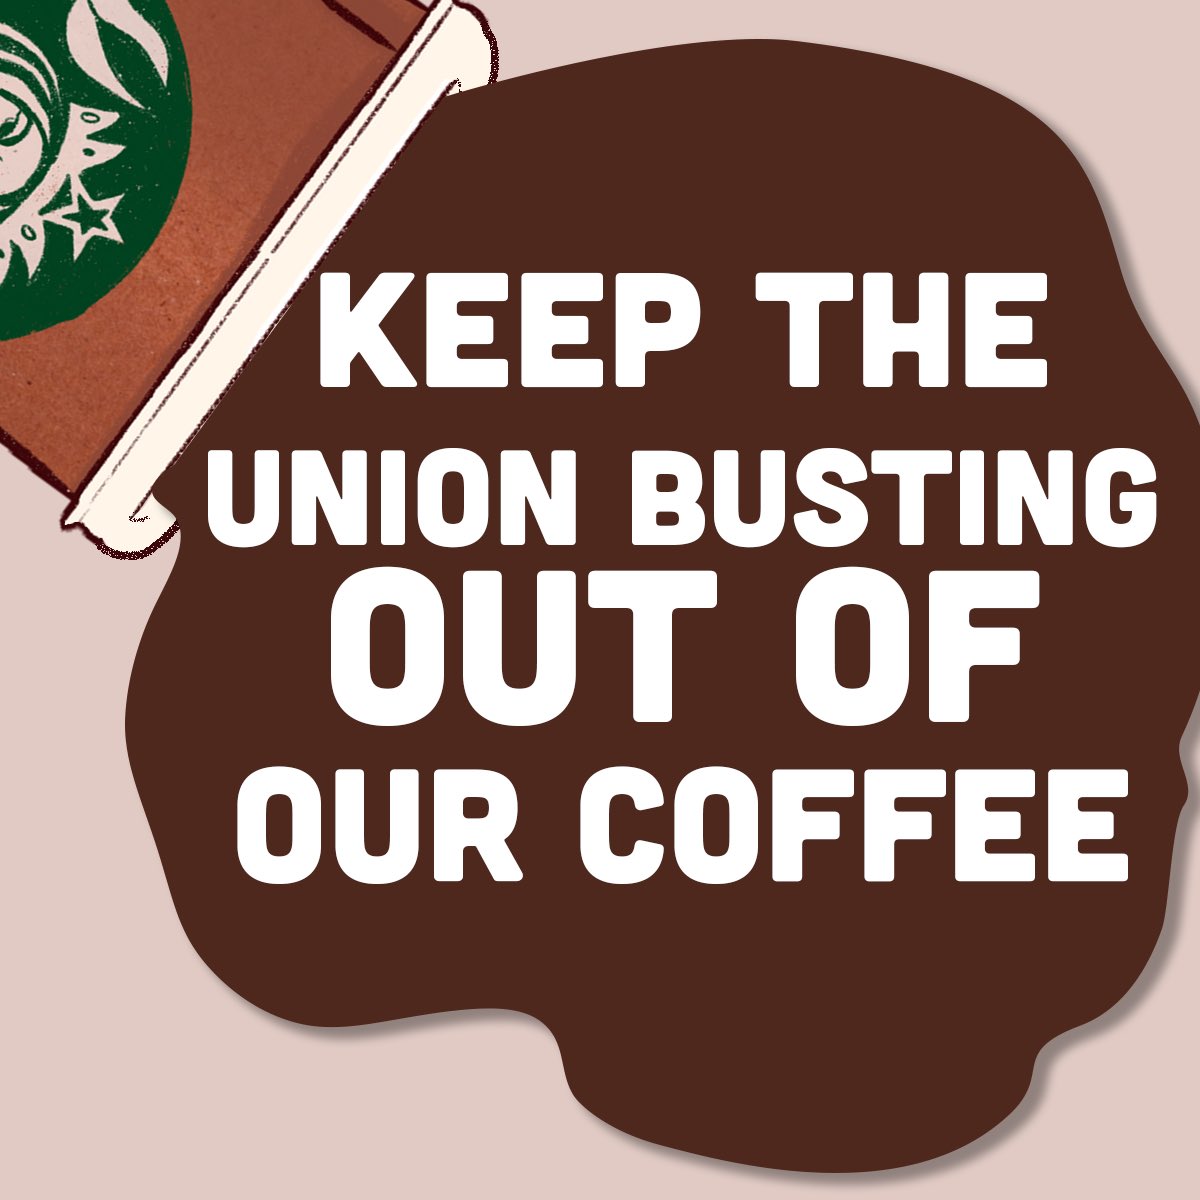 We didn't order union-busting with our coffee! @Starbucks workers across the country are demanding fair pay, safety, and their right to a union! We're with them! #UnionizeStarbucks #SBhelp Sign the petition: bit.ly/40ncbtC